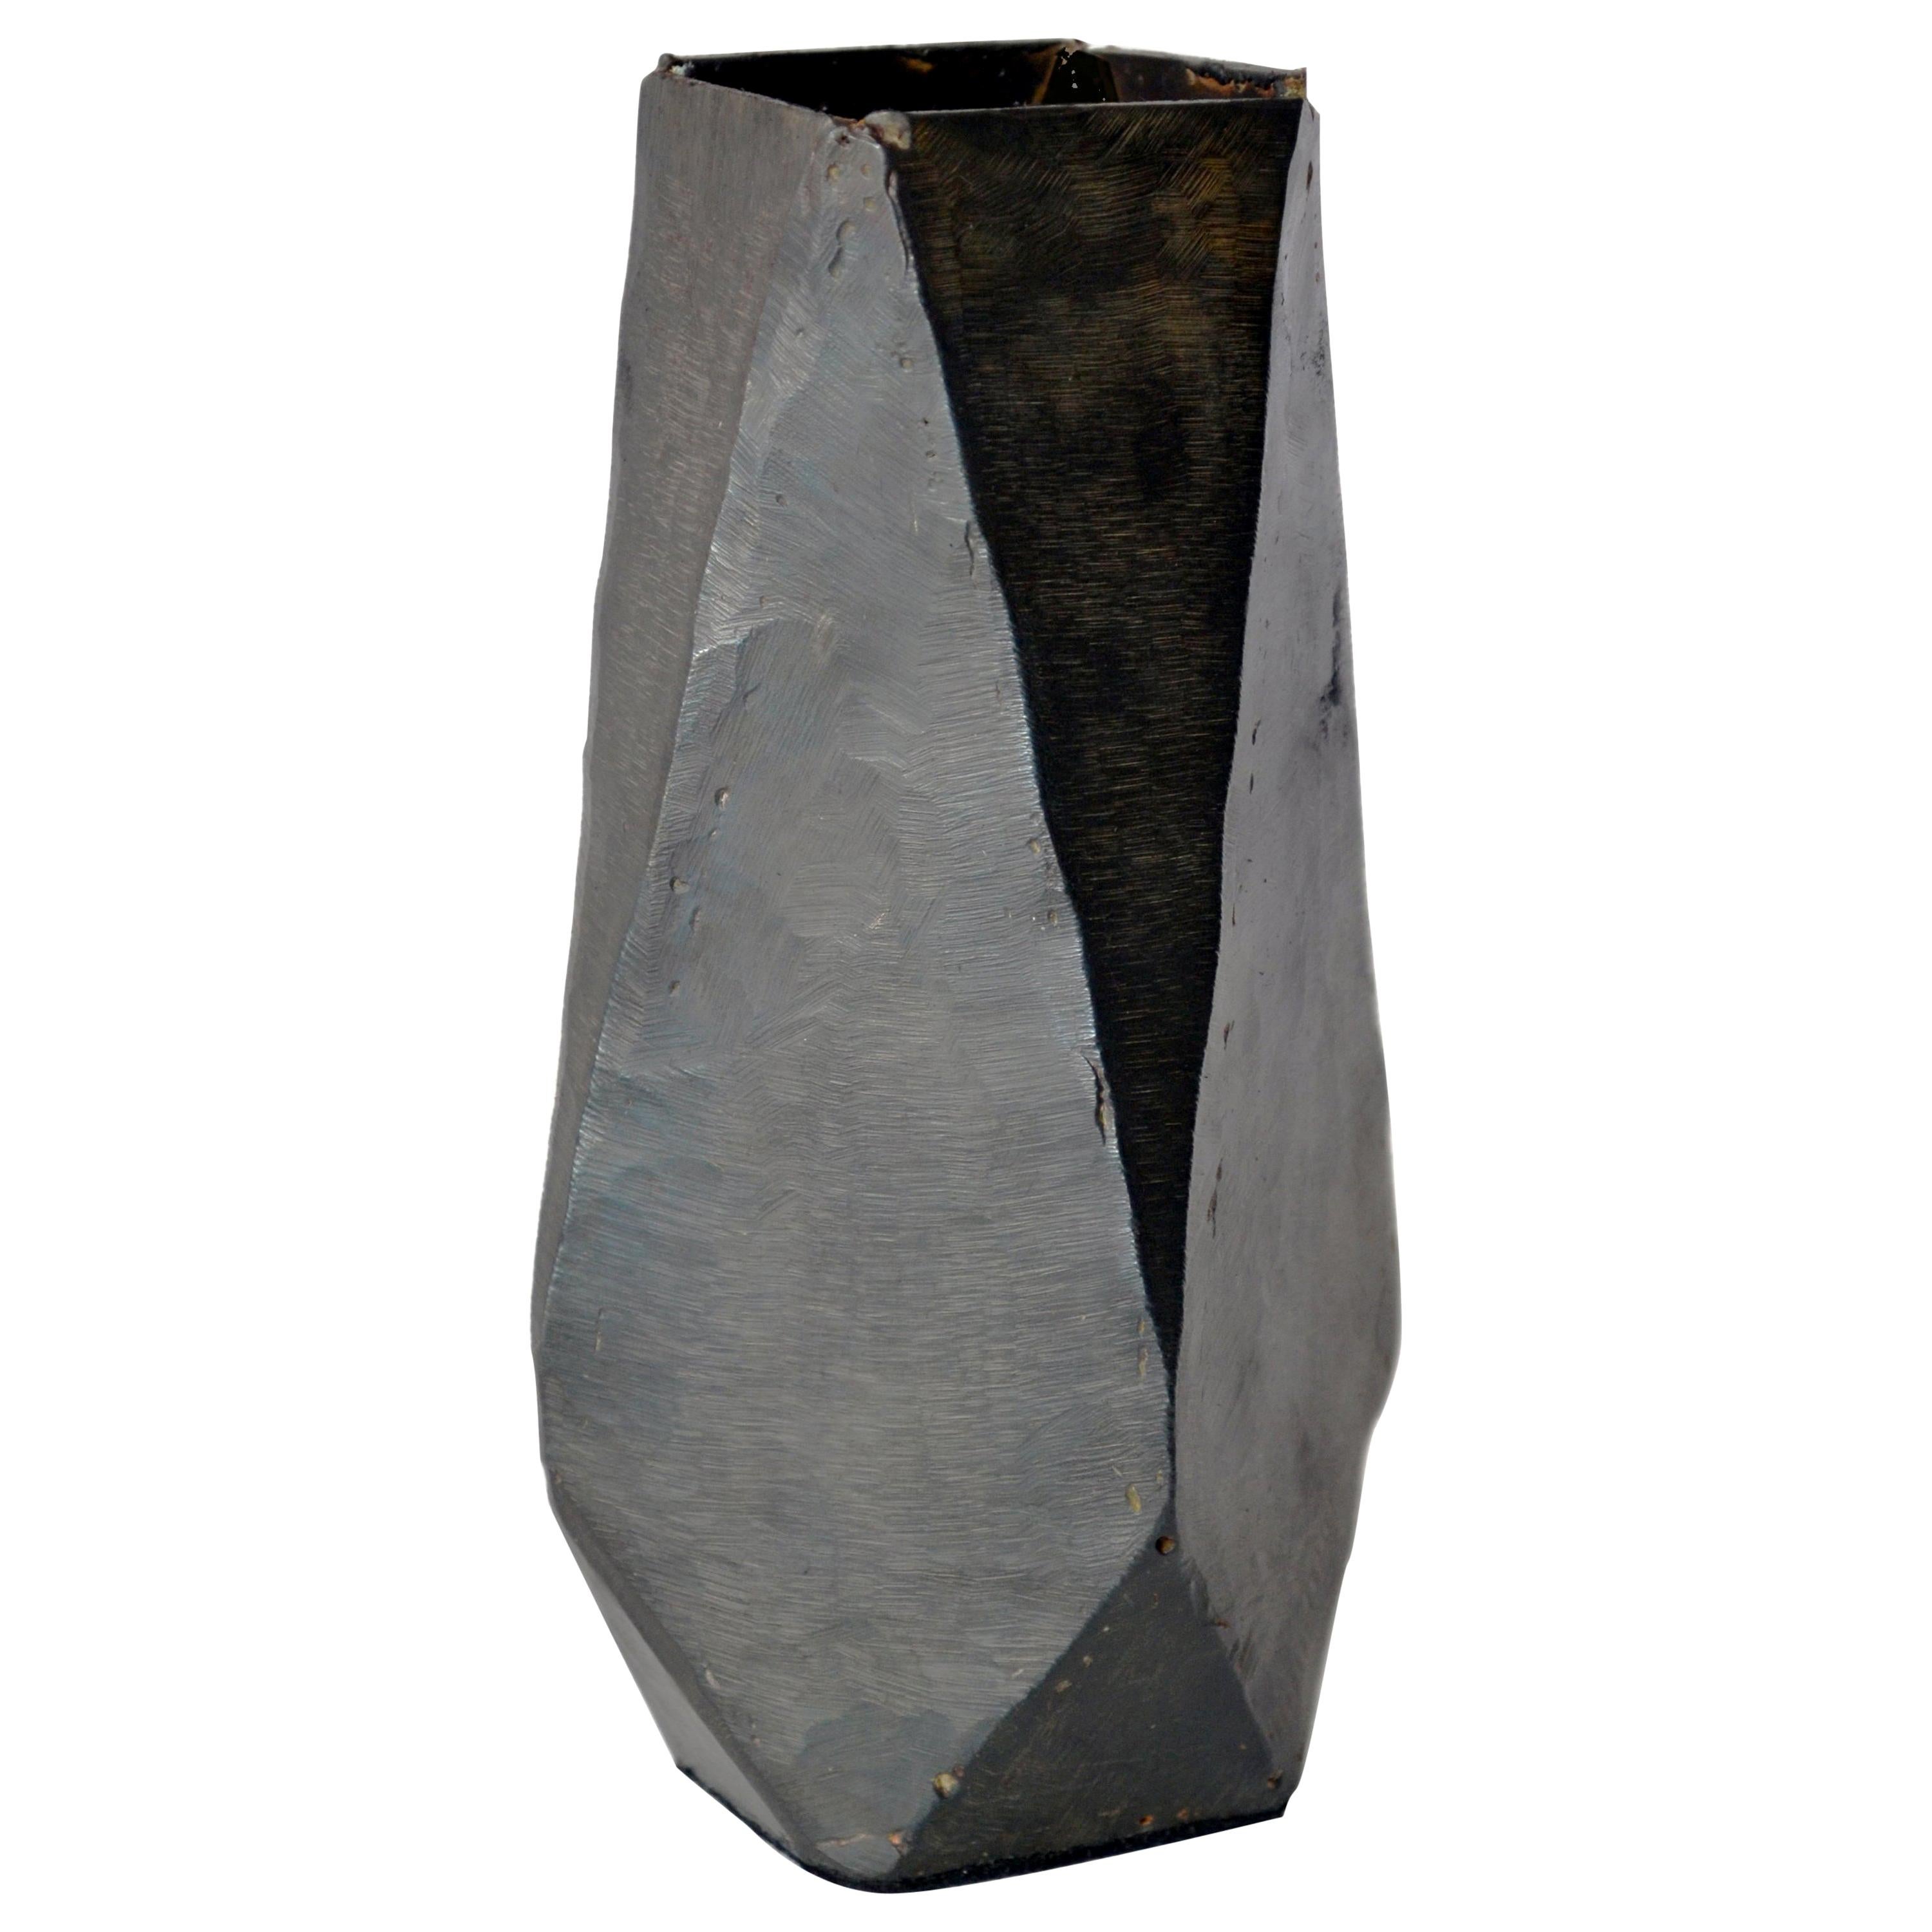 Geometric Vessel Sculpture Handmade Blackened and Waxed Iron For Sale